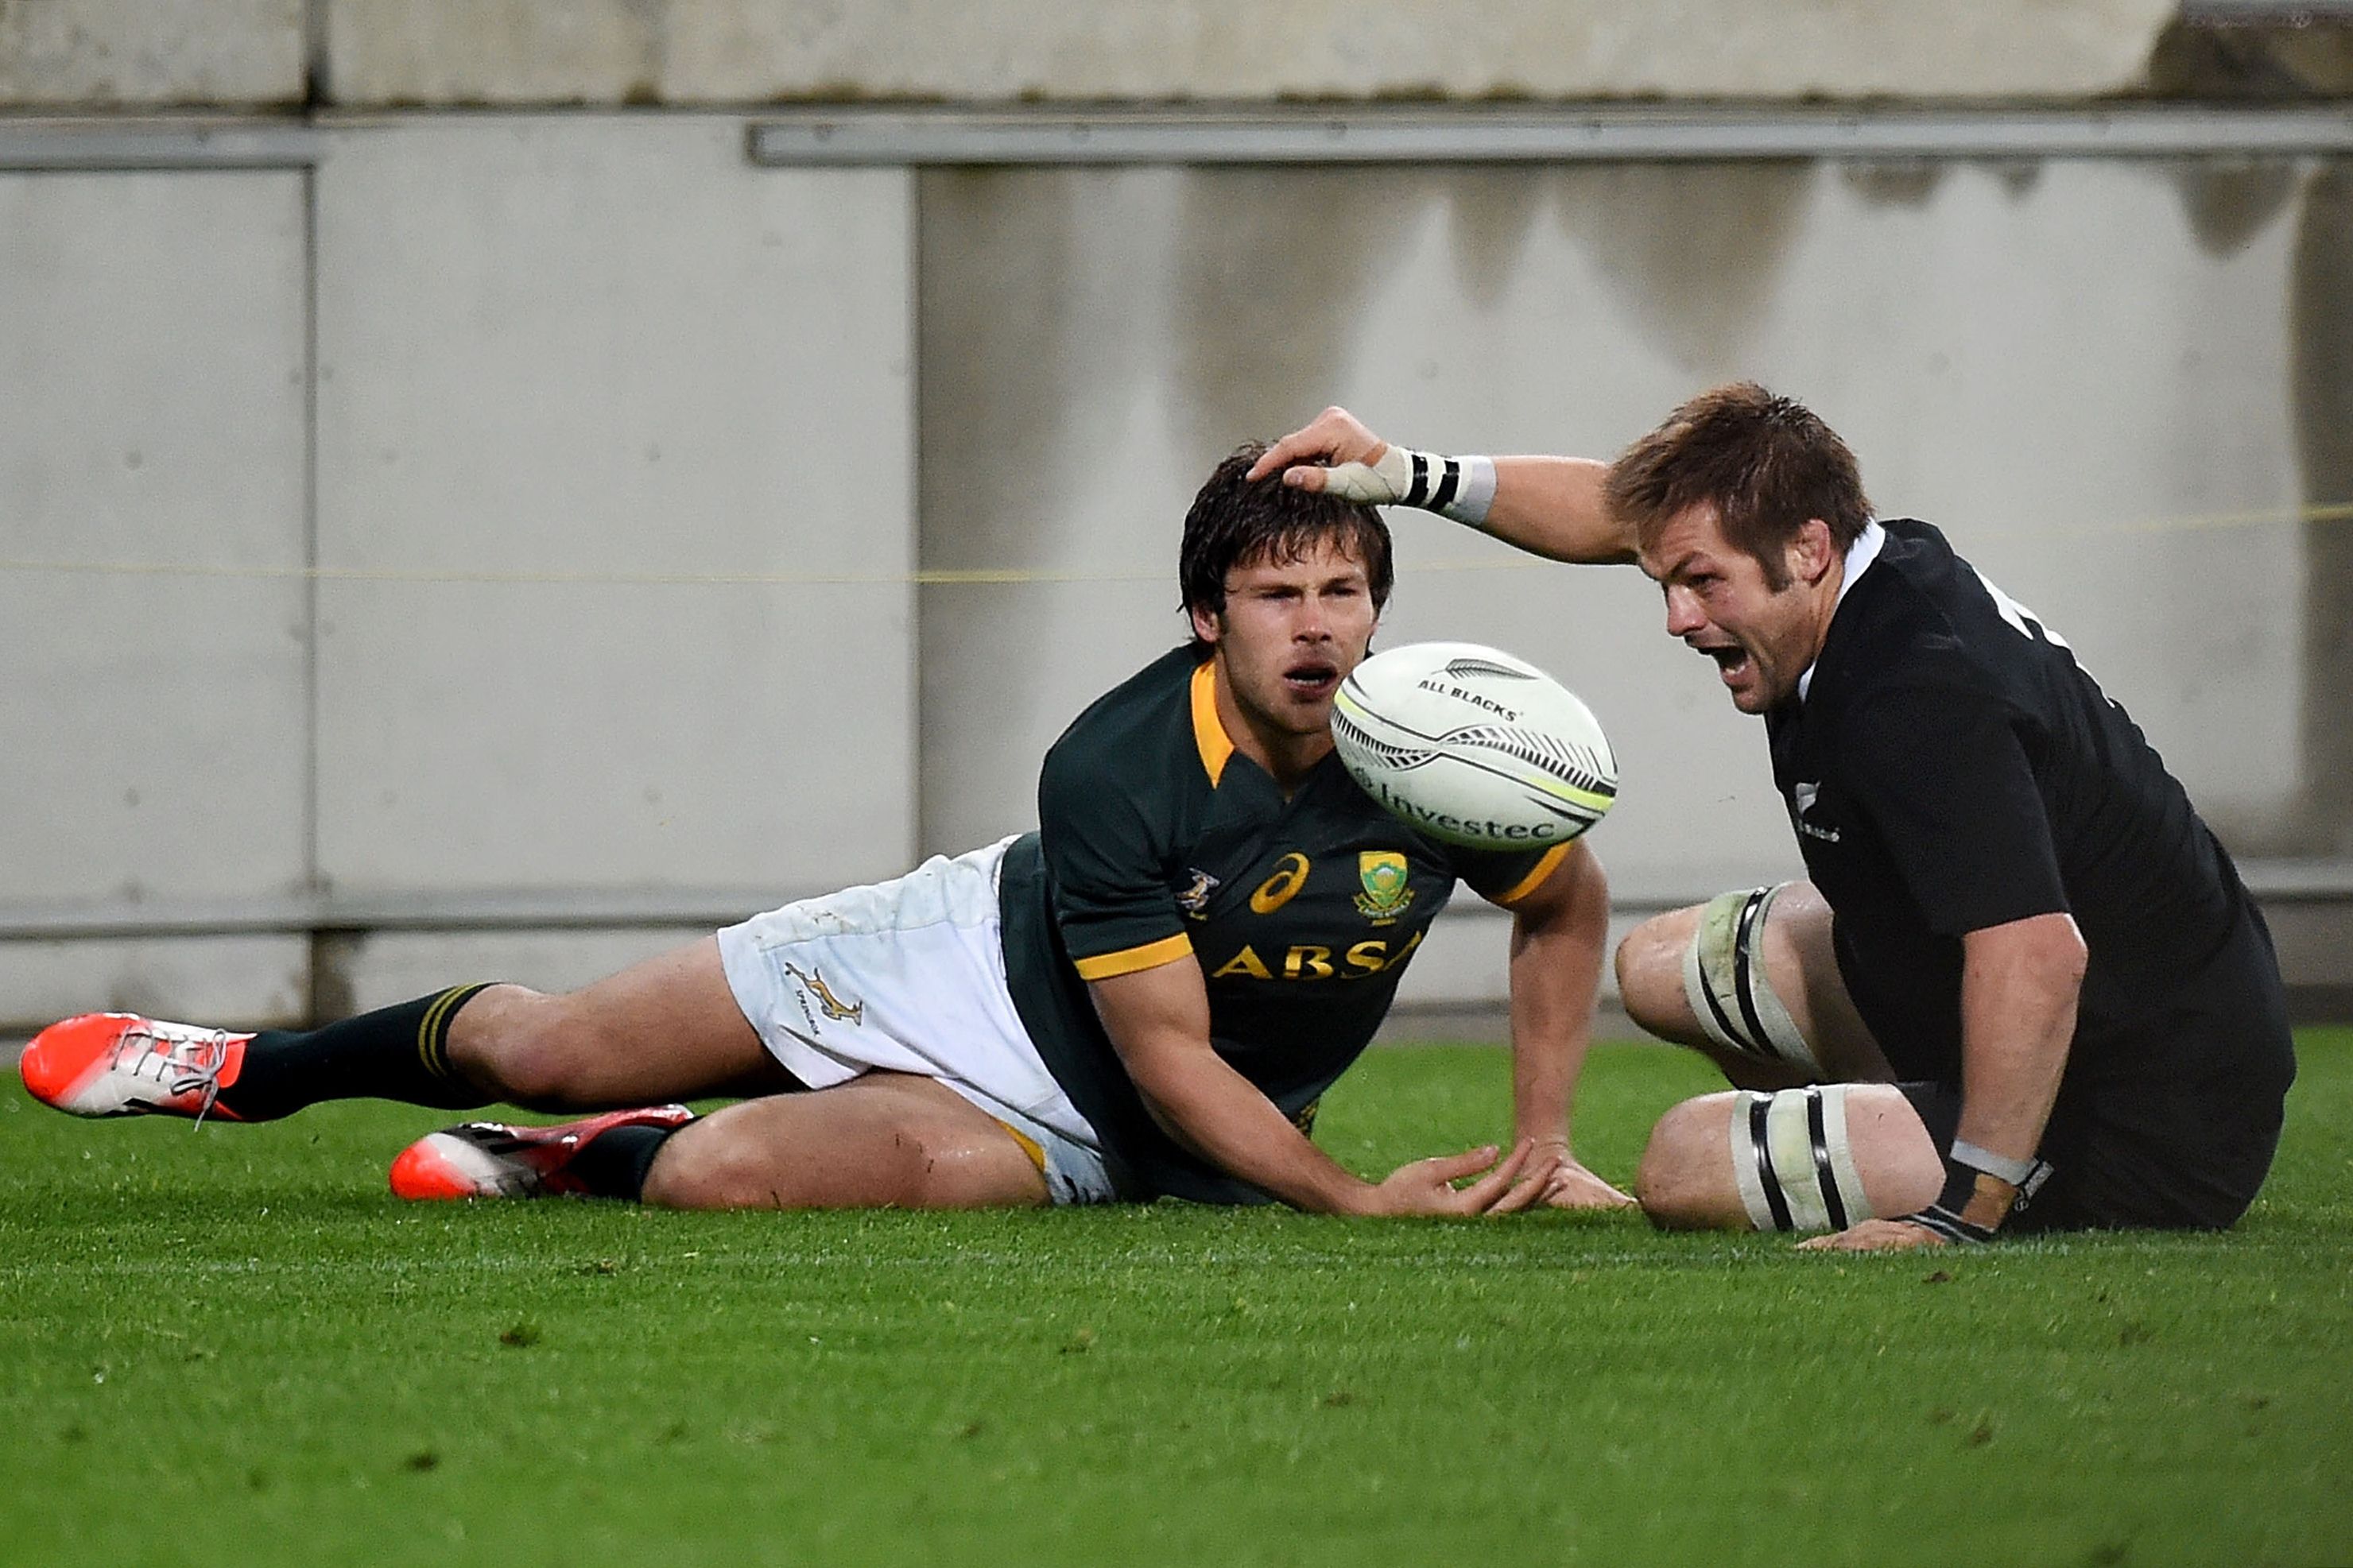 Jan Serfontein couldn't stop All Blacks captain Richie McCaw scoring in their last test, but he has been the Springboks' top tackler. Photo: AFP